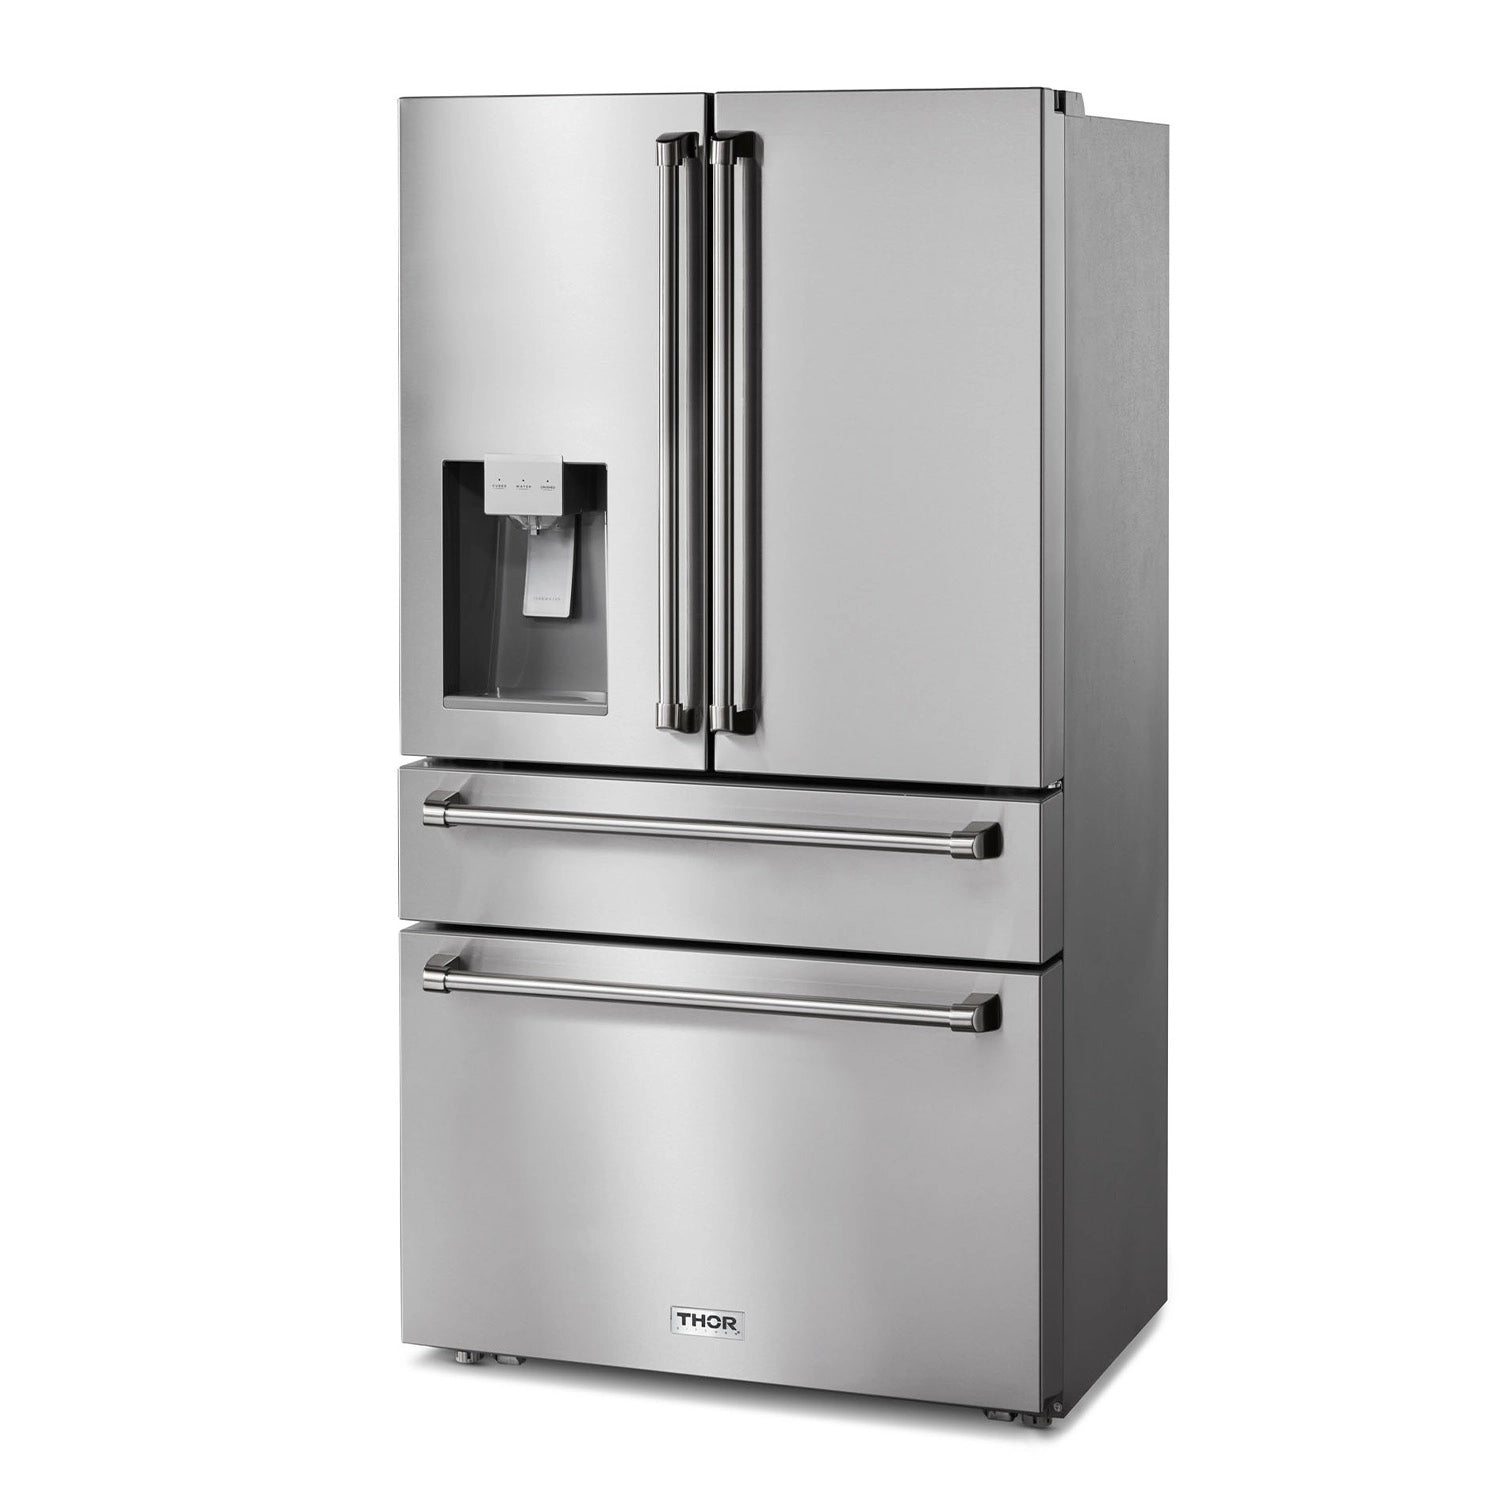 THOR TRF3601FD | 36" Wide Professional French Door Refrigerator w/ Ice & Water Dispenser